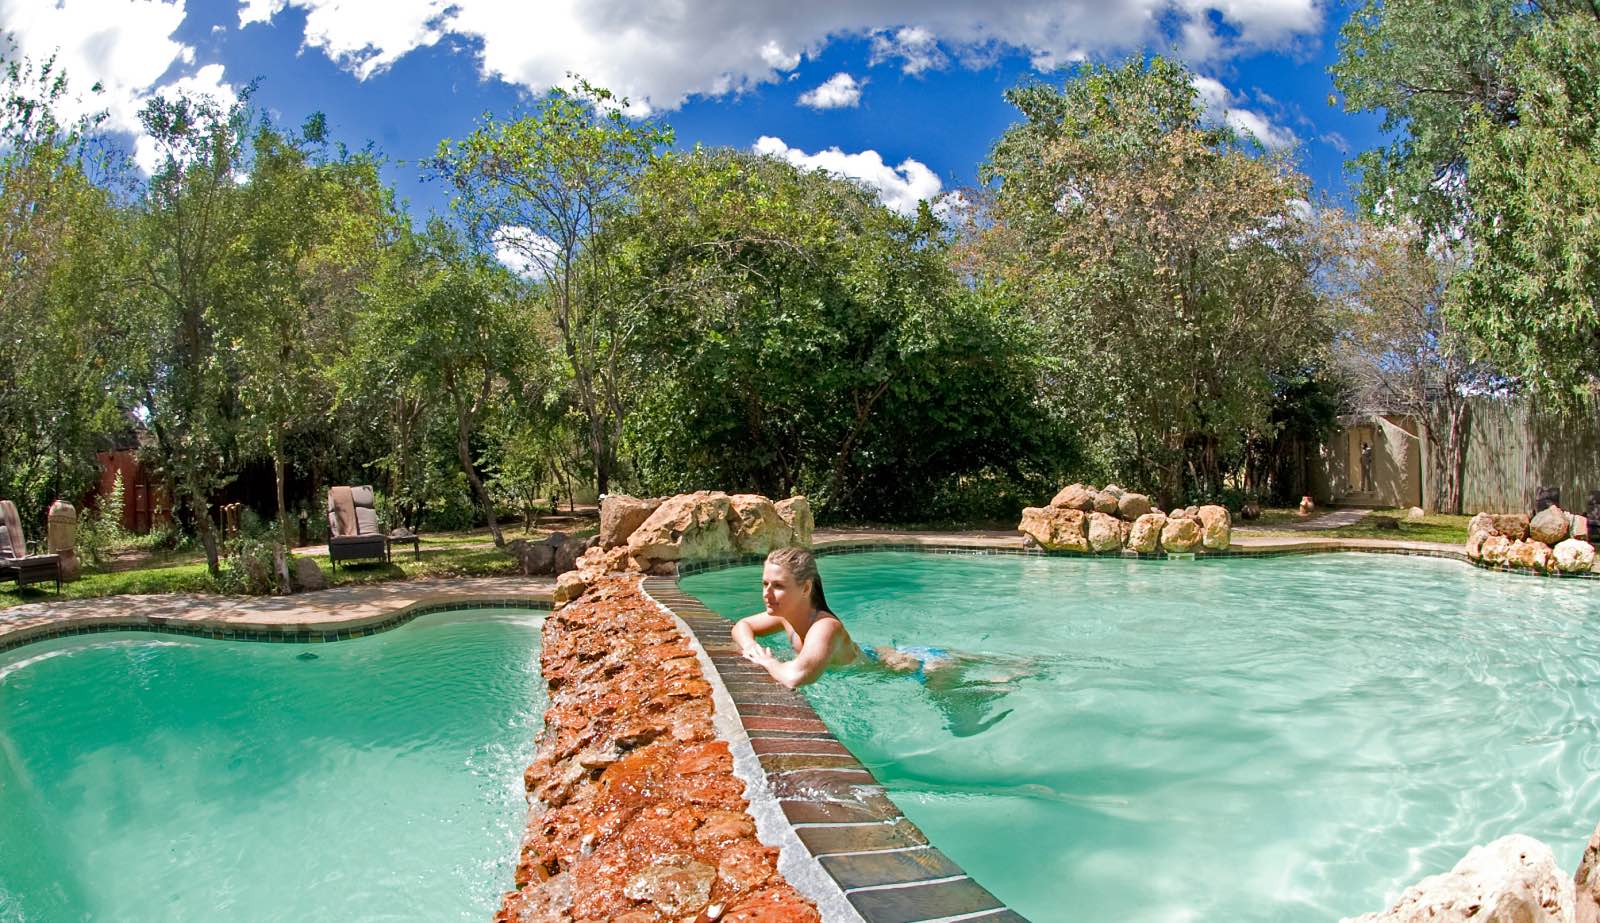 A refreshing swimming pool with a view of the Chobe River below at Chobe Chilwero